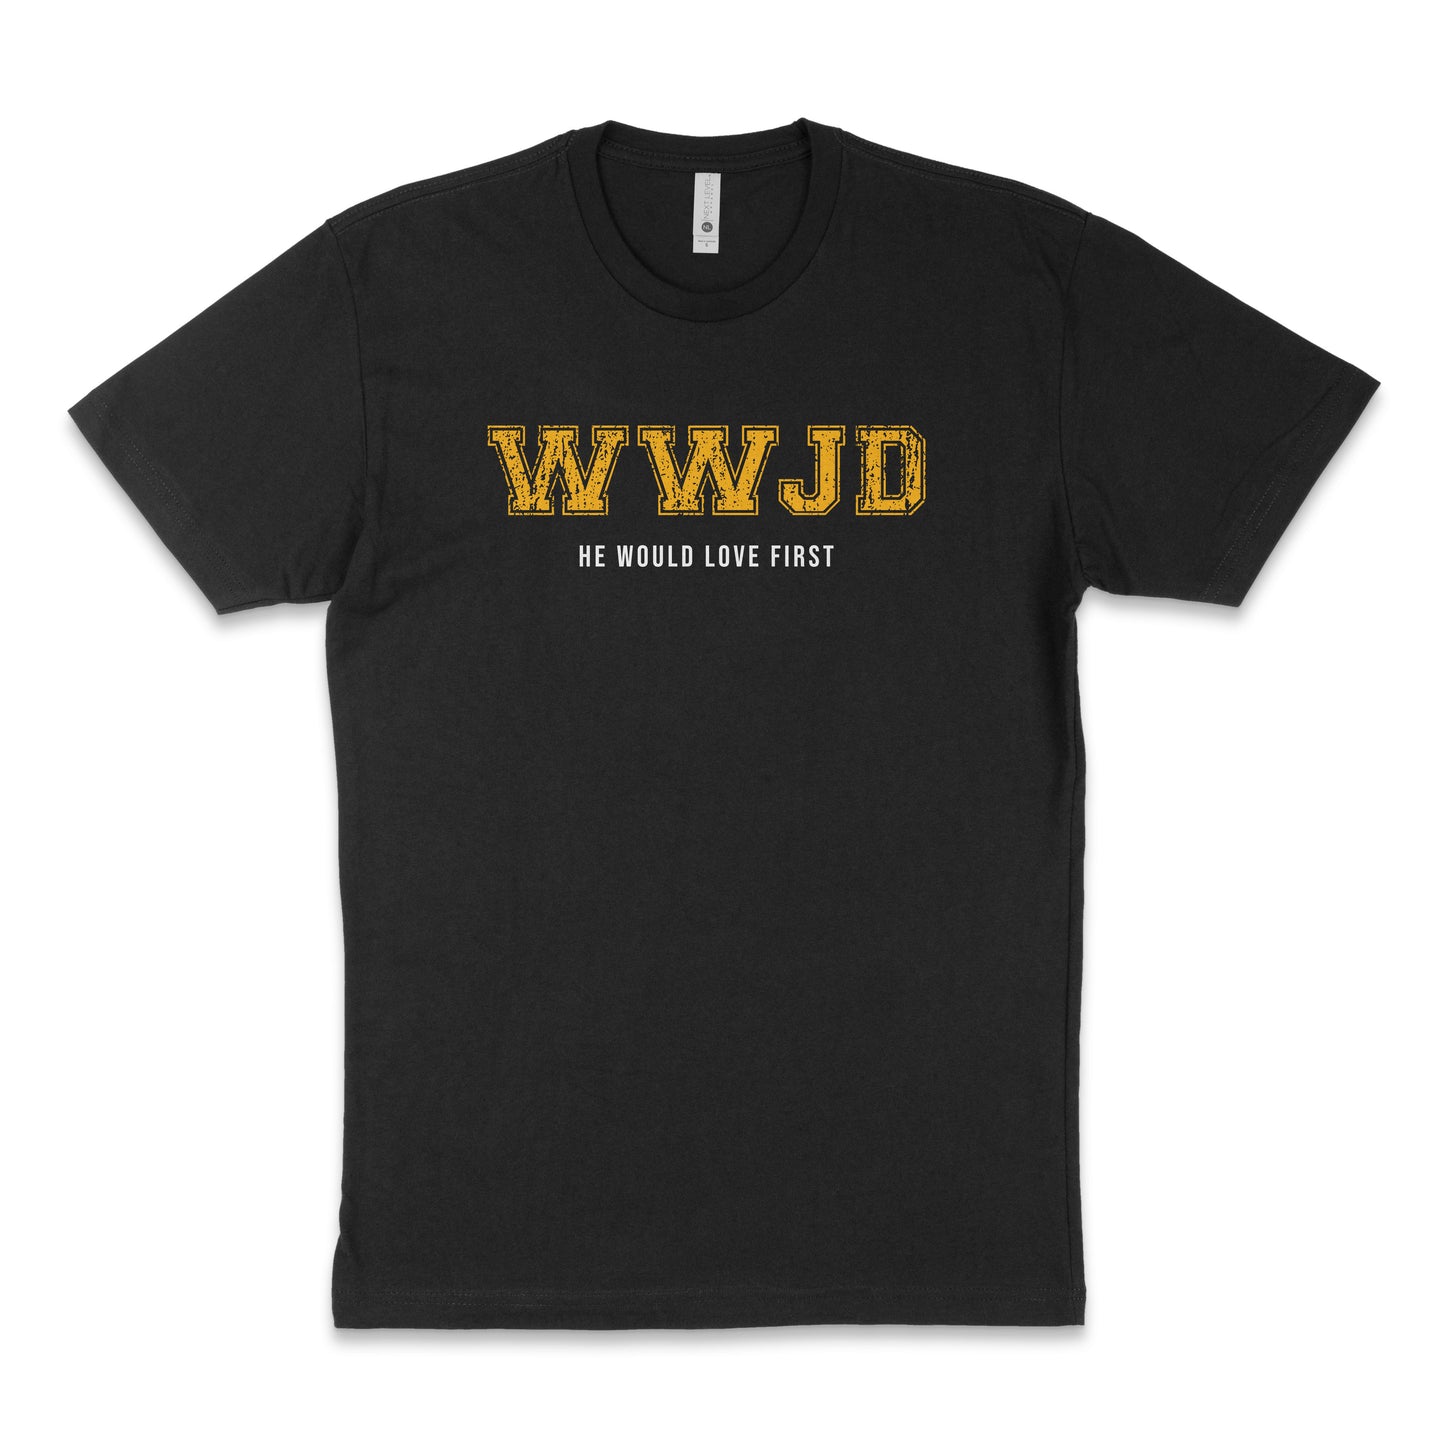 Retro College WWJD He Would Love First T-Shirt